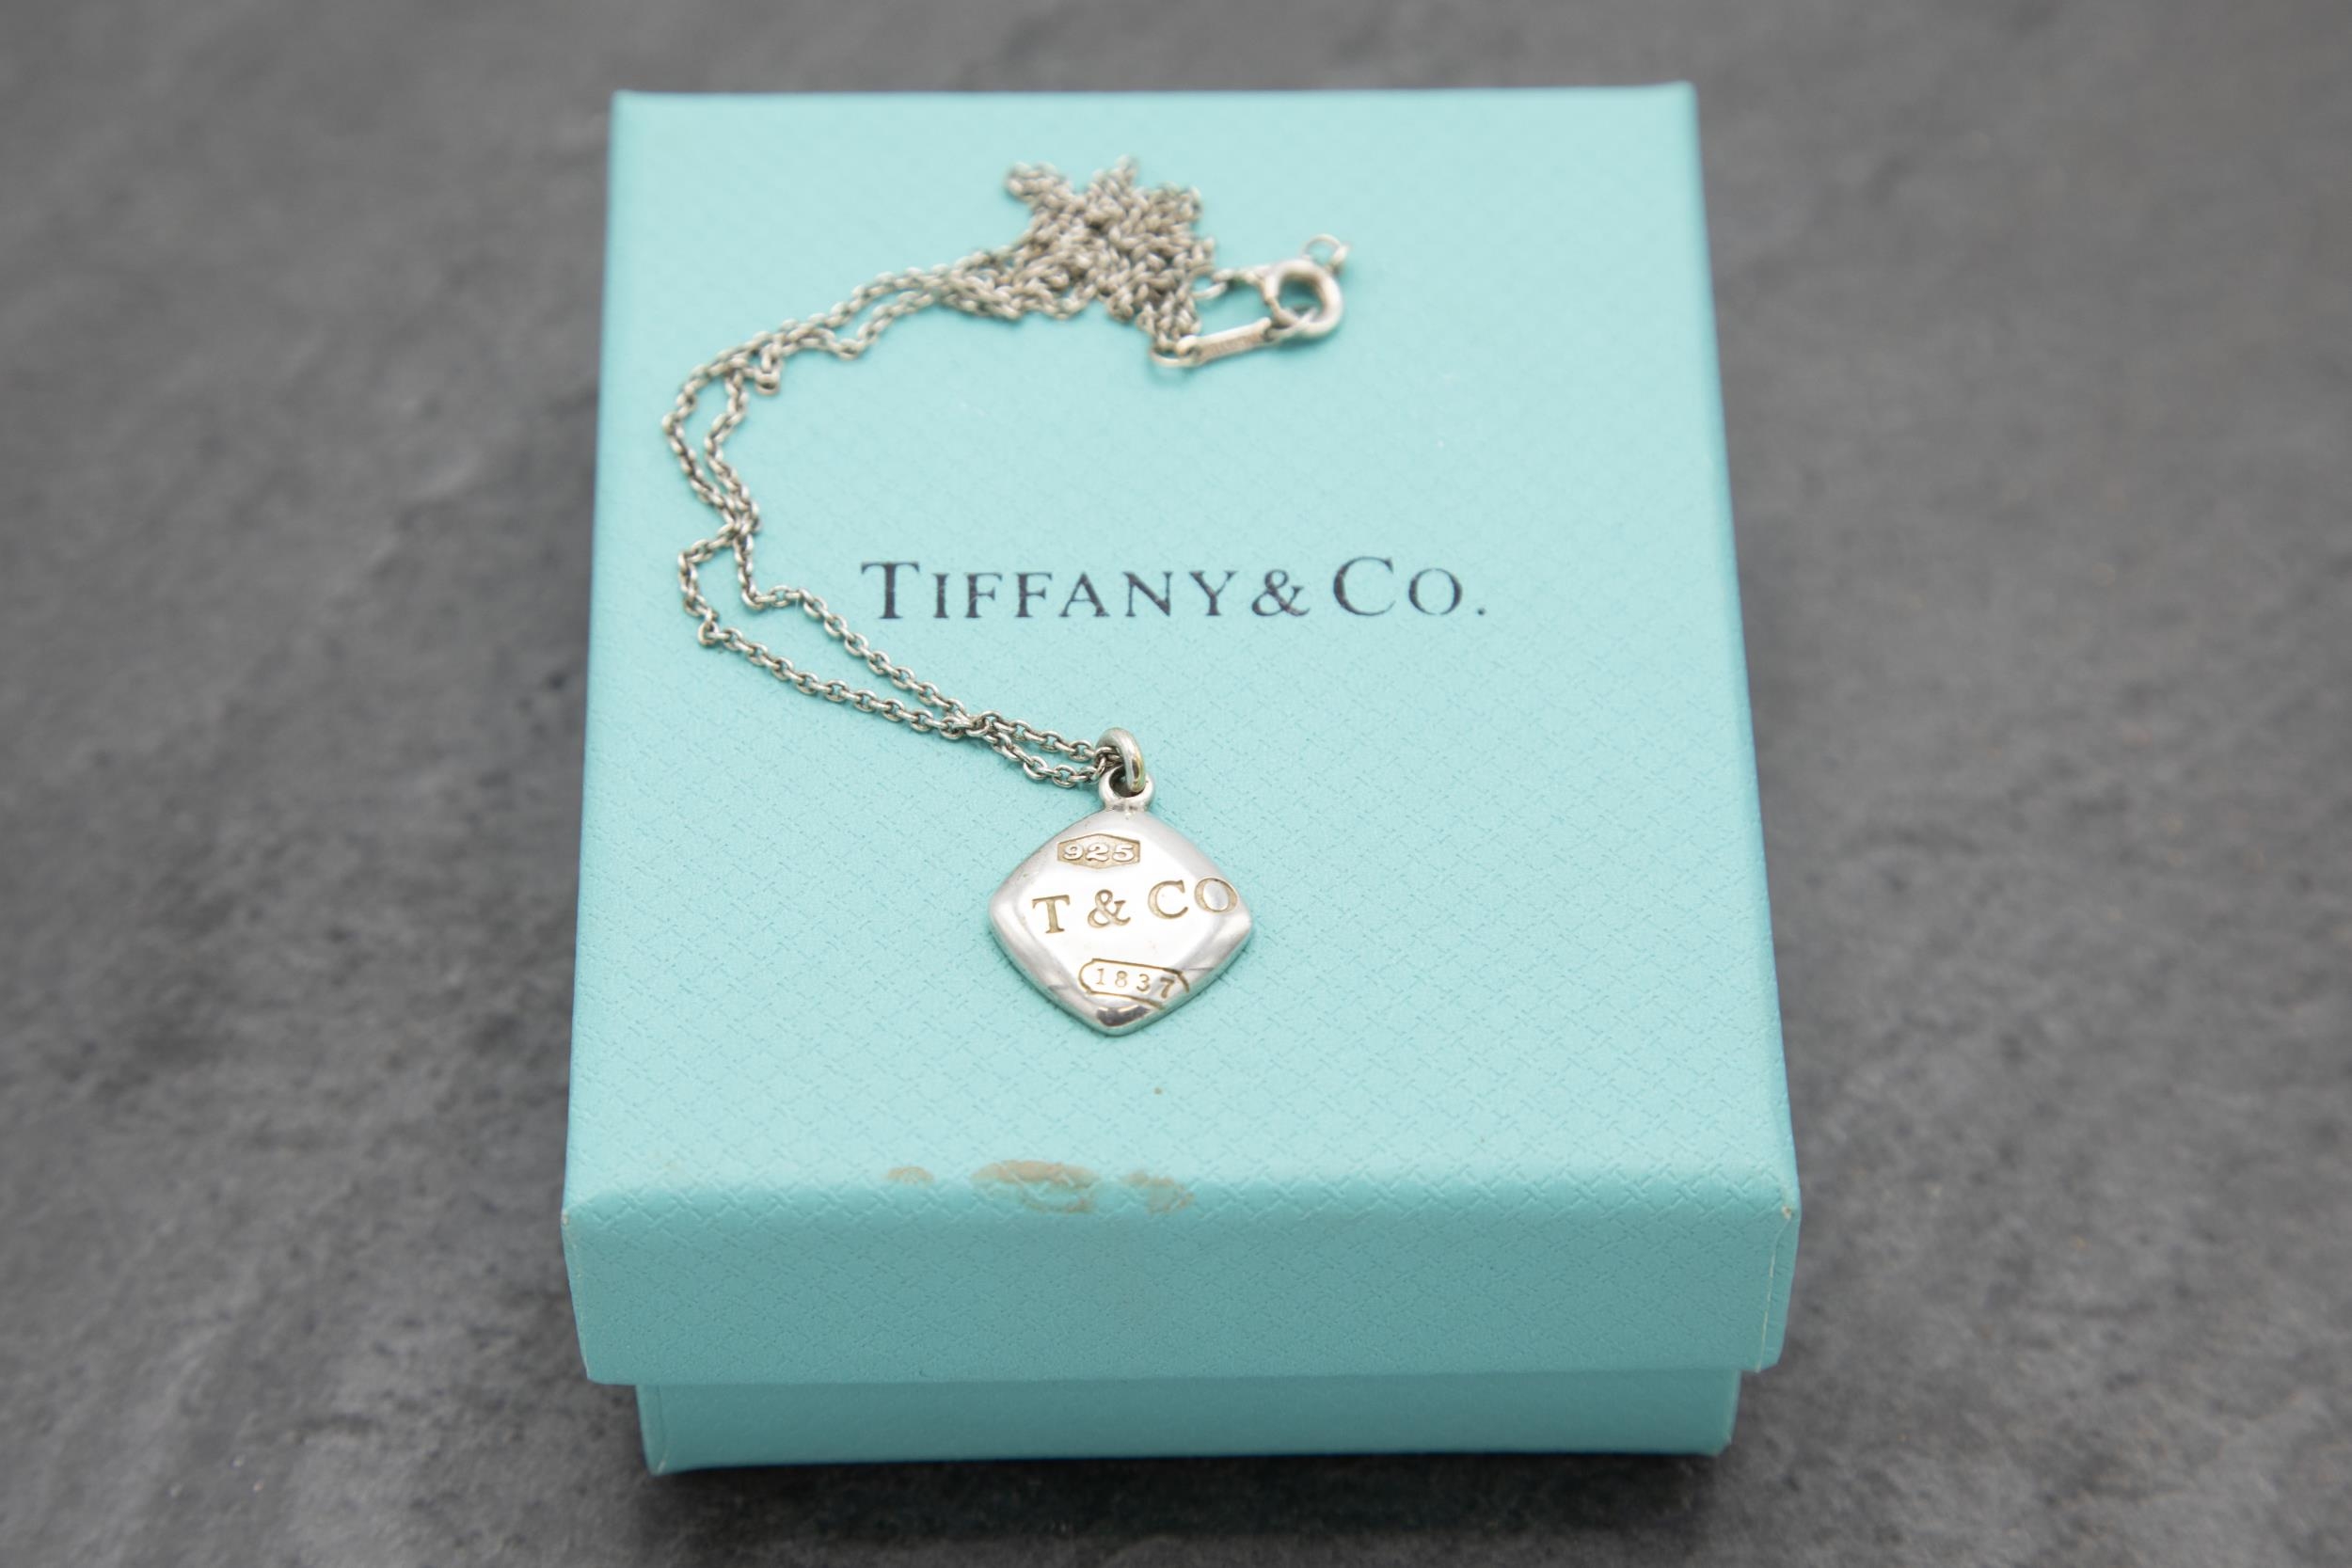 Tiffany & Co 925 silver cushion necklace with 16" rolo chain, held in original box, 5.5g